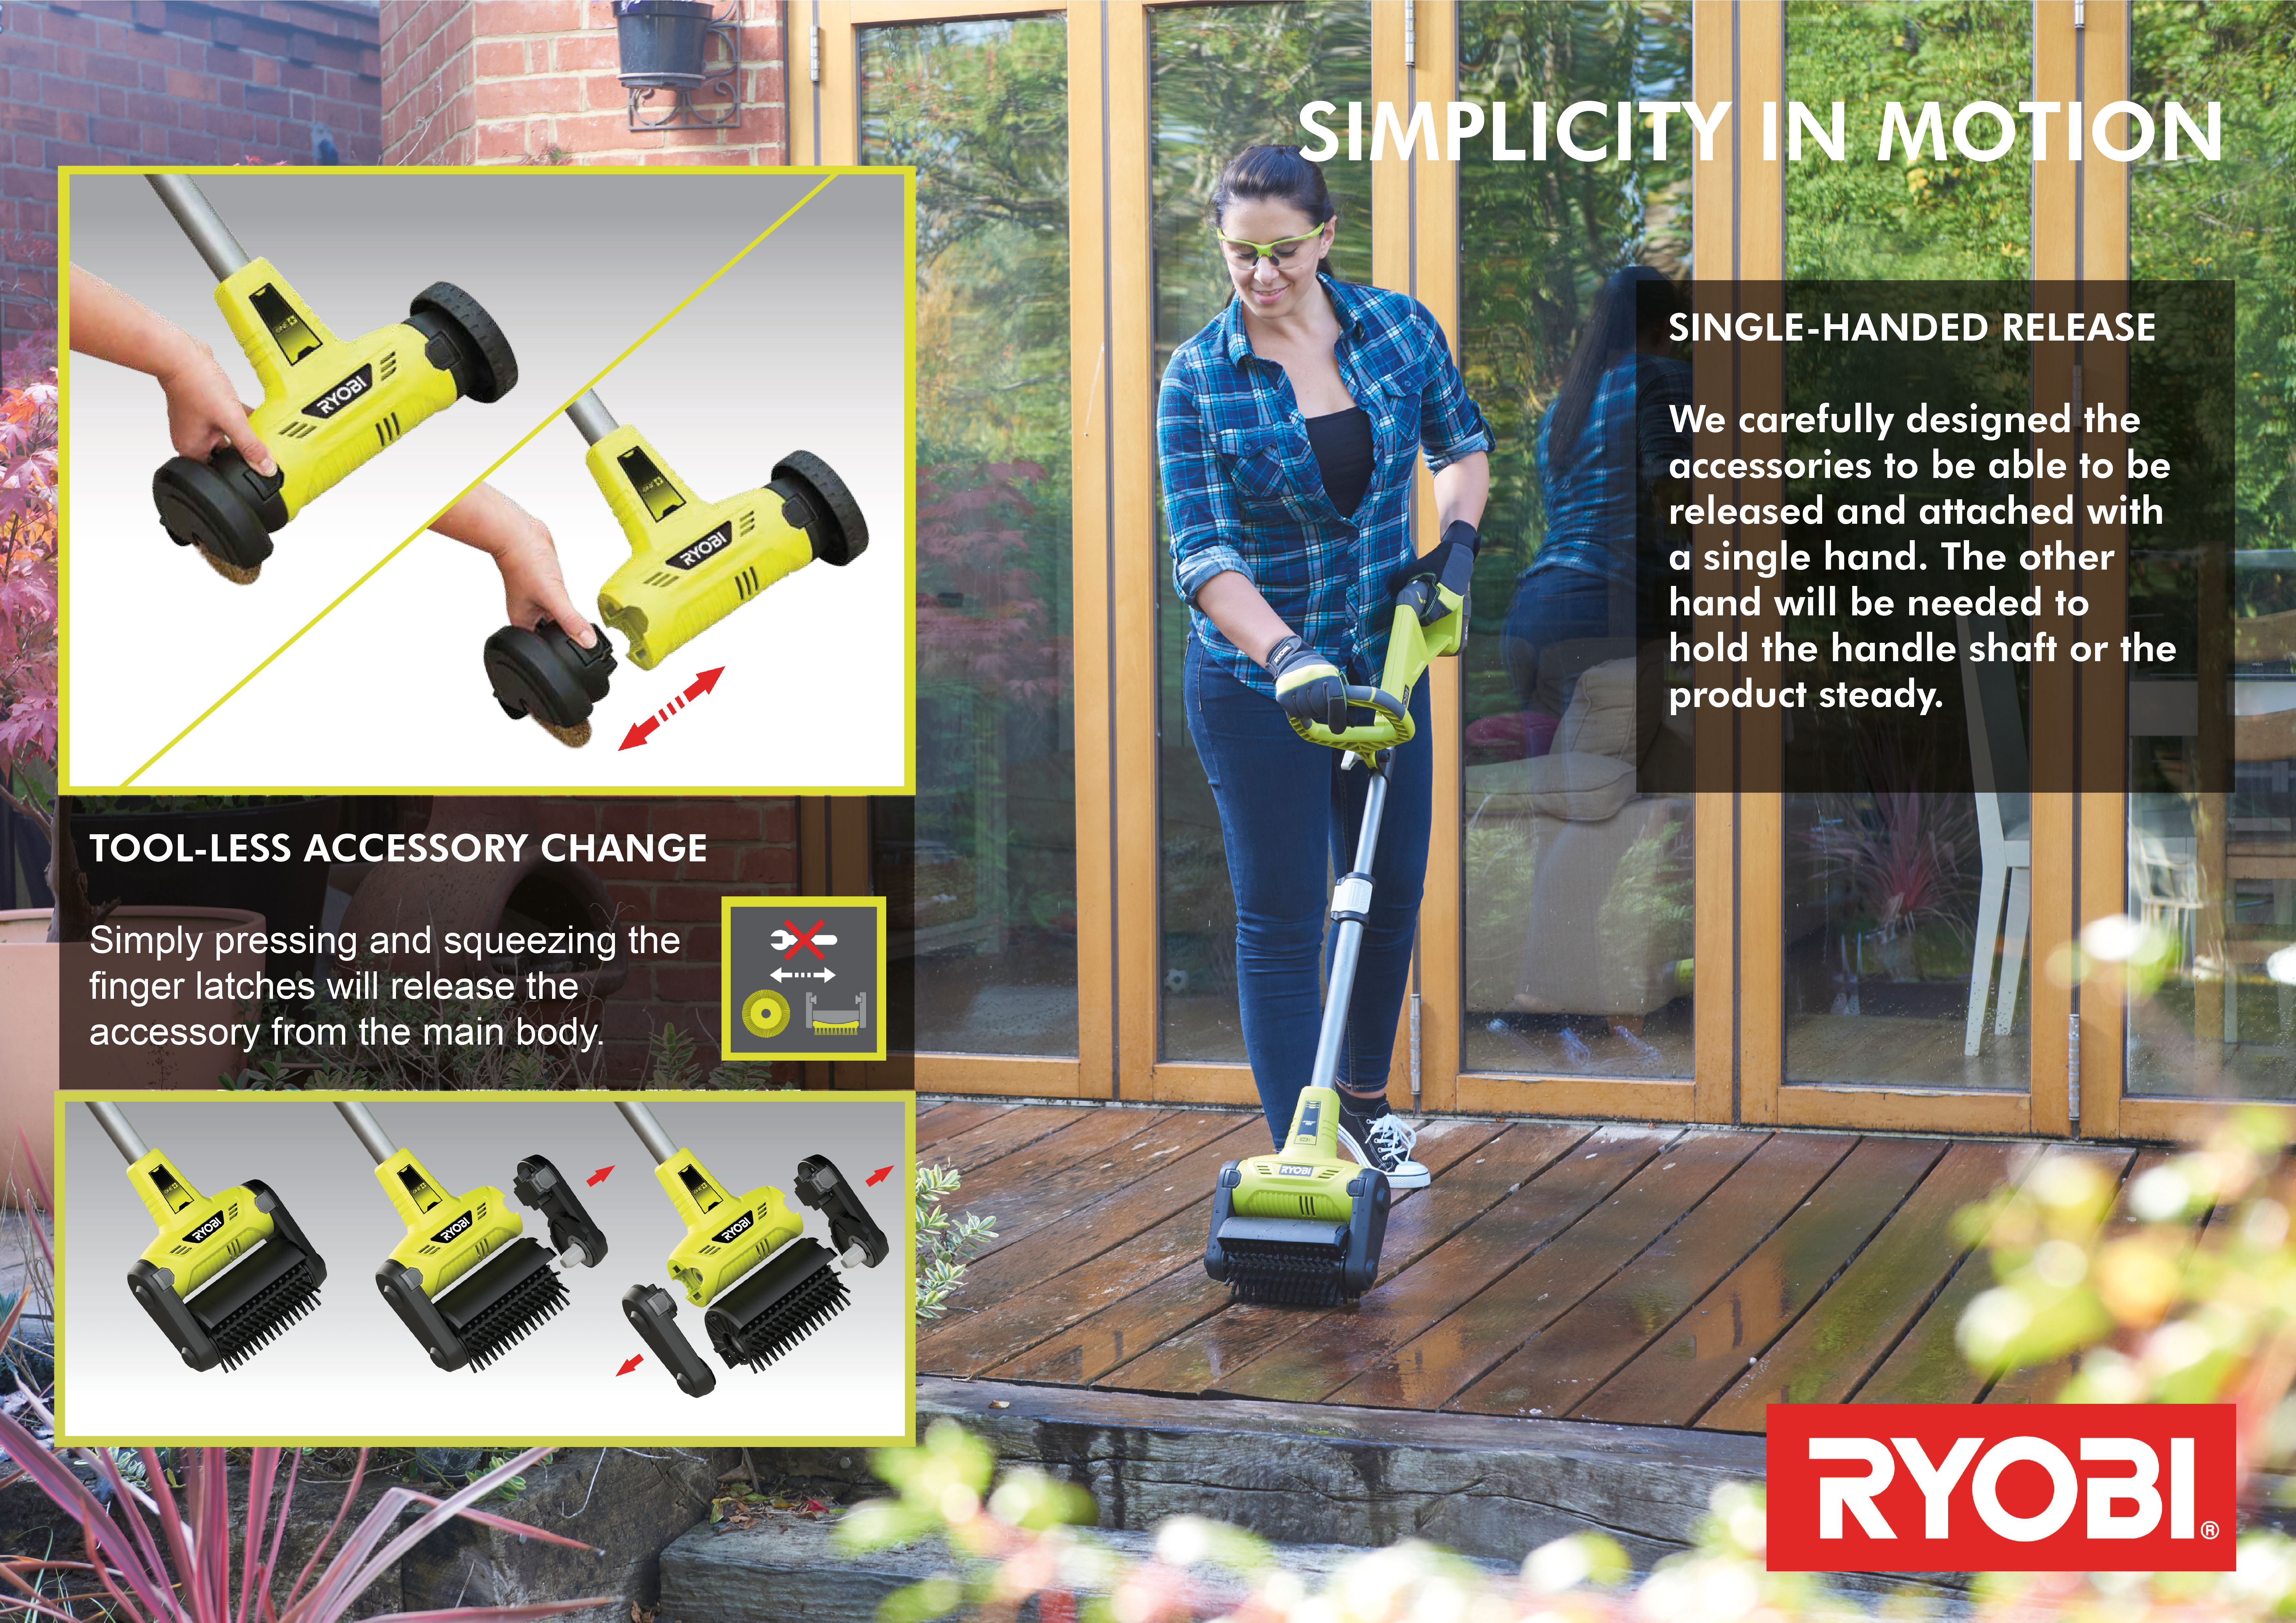 https://cdn.yournet.space/good-design.org/2019/2019%20Winners%20Images/Product%20Design/Hardware%20and%20Building/1724-Ryobi%2018v%20Cordless%20Patio%20Cleaner/PATIO%20CLEANER%20-%20DESIGN%2020190128-SLIDES3.jpg